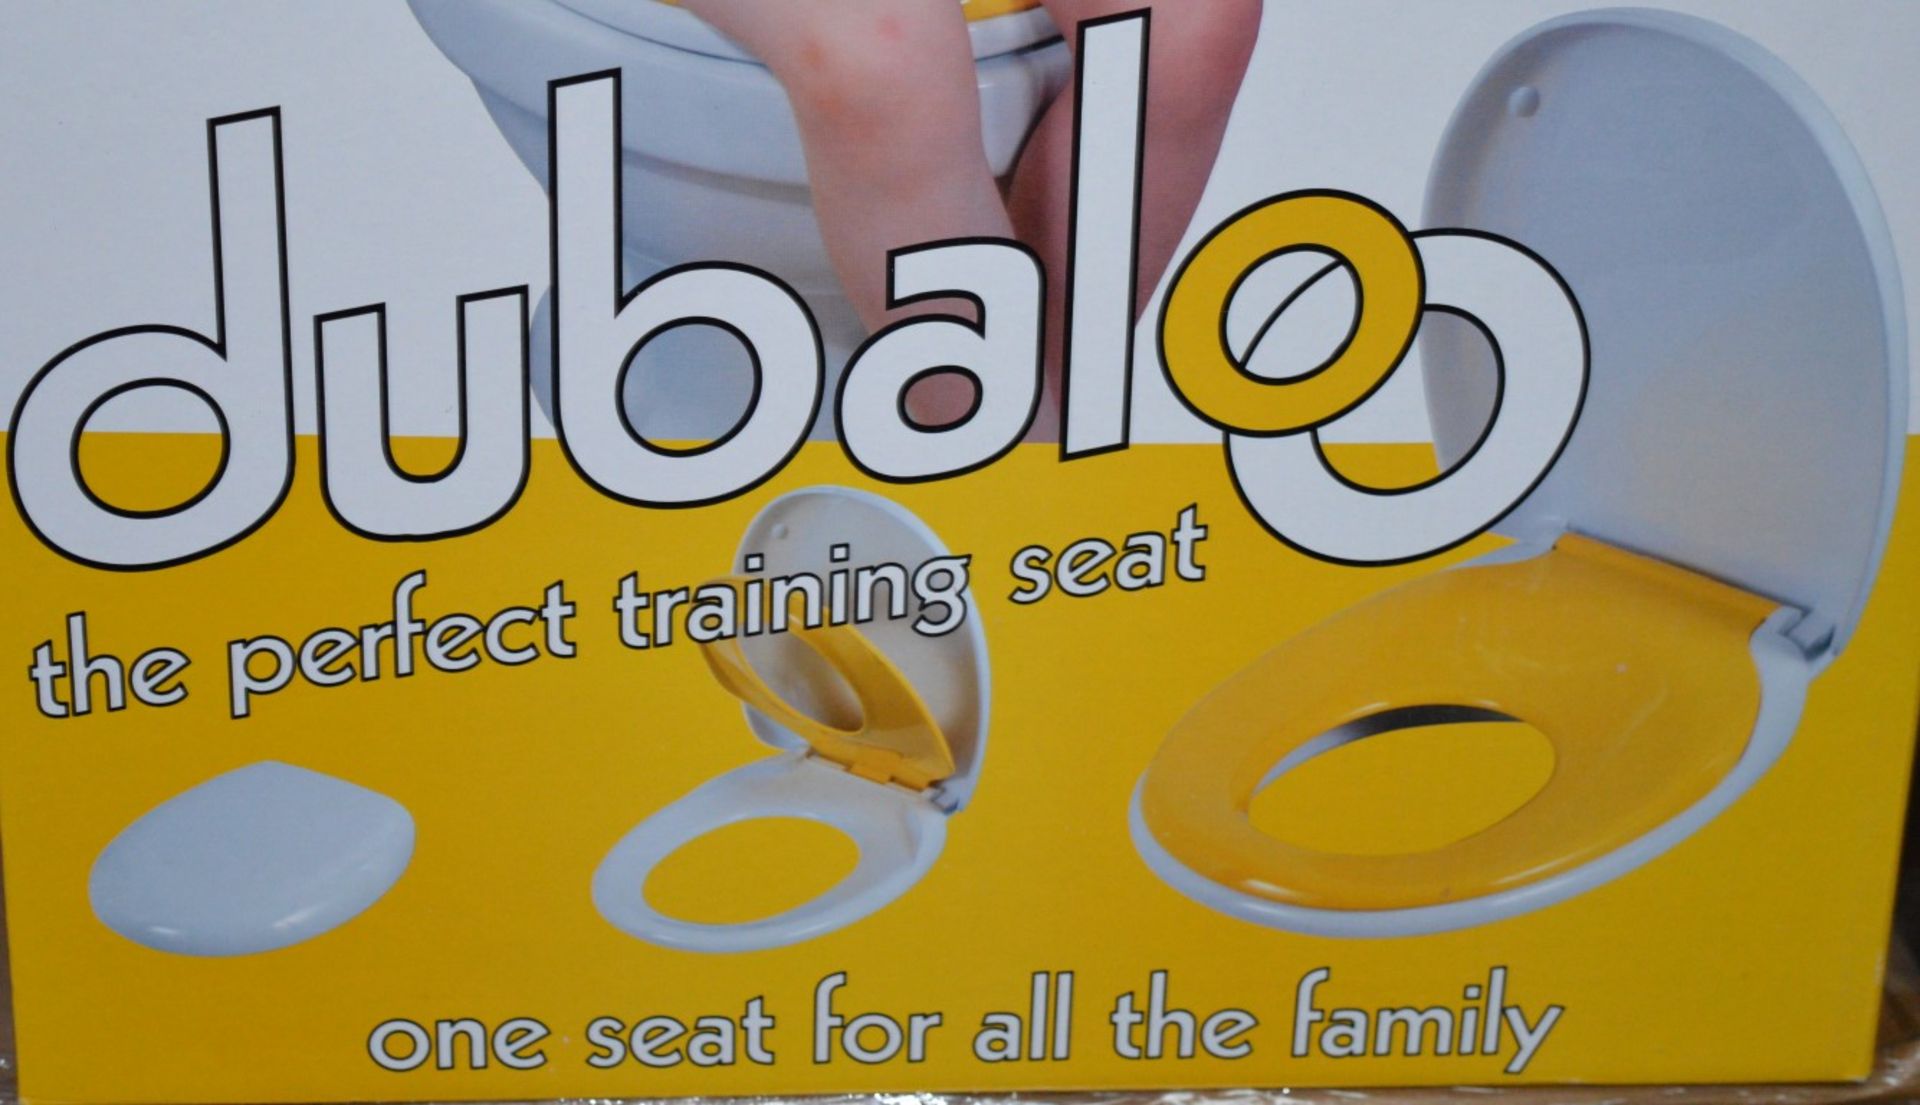 1 x Dubaloo 2 in 1 Family Training Toilet Seat - One Seat For All The Family - Full Size Toilet Seat - Image 5 of 6